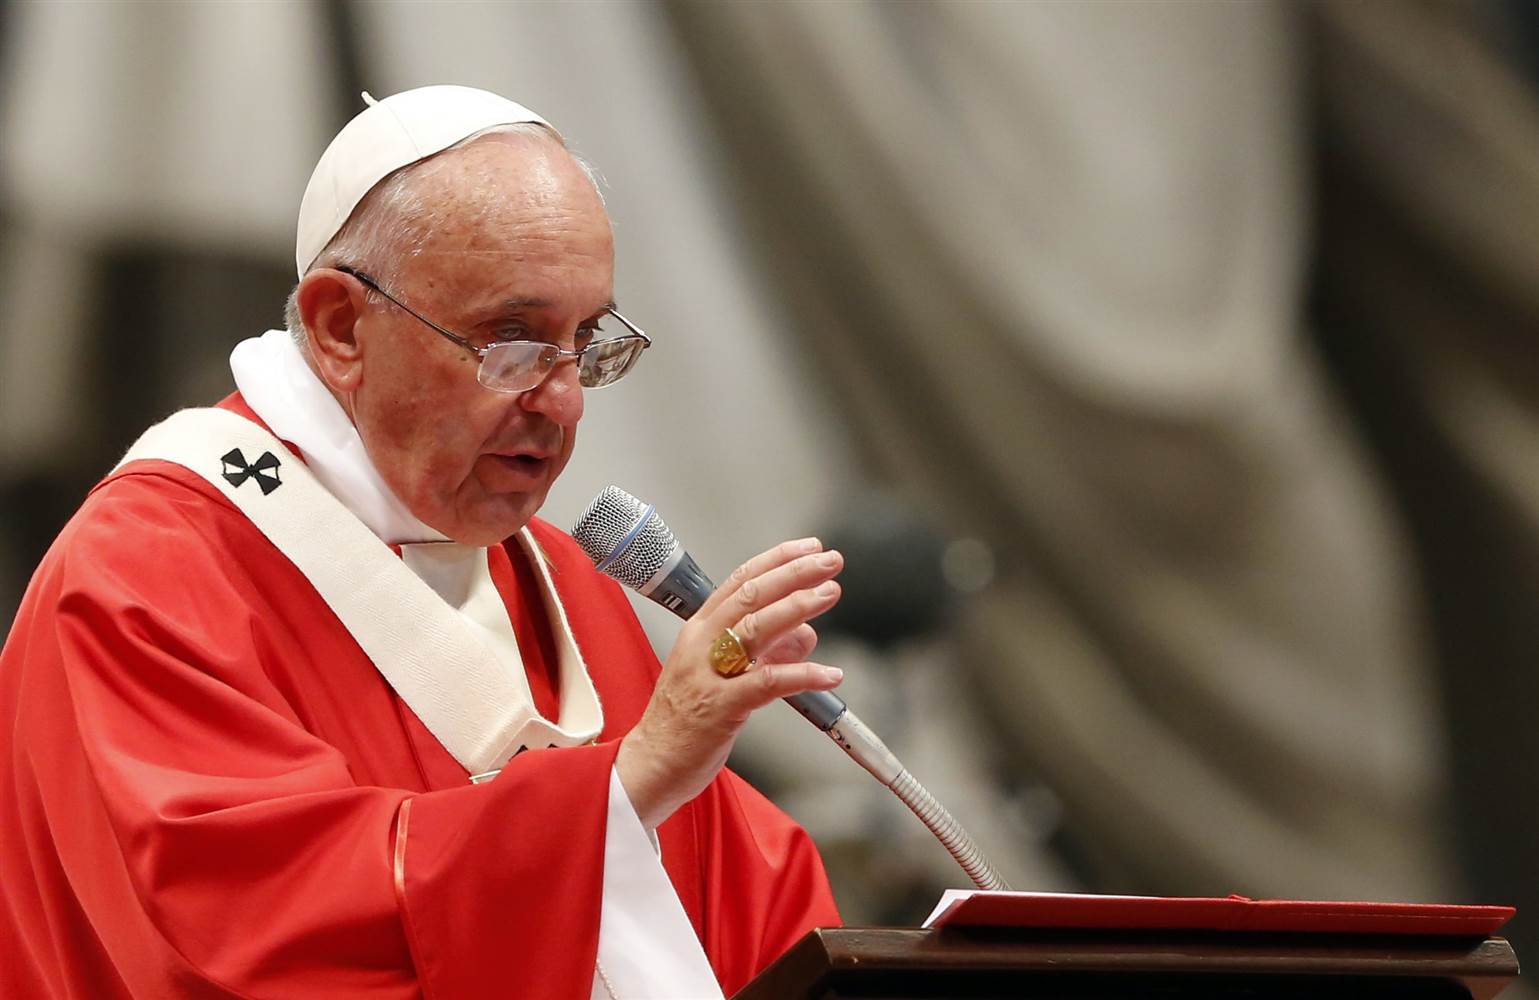 Pope Francis warns press not to rely on rumors,gossip